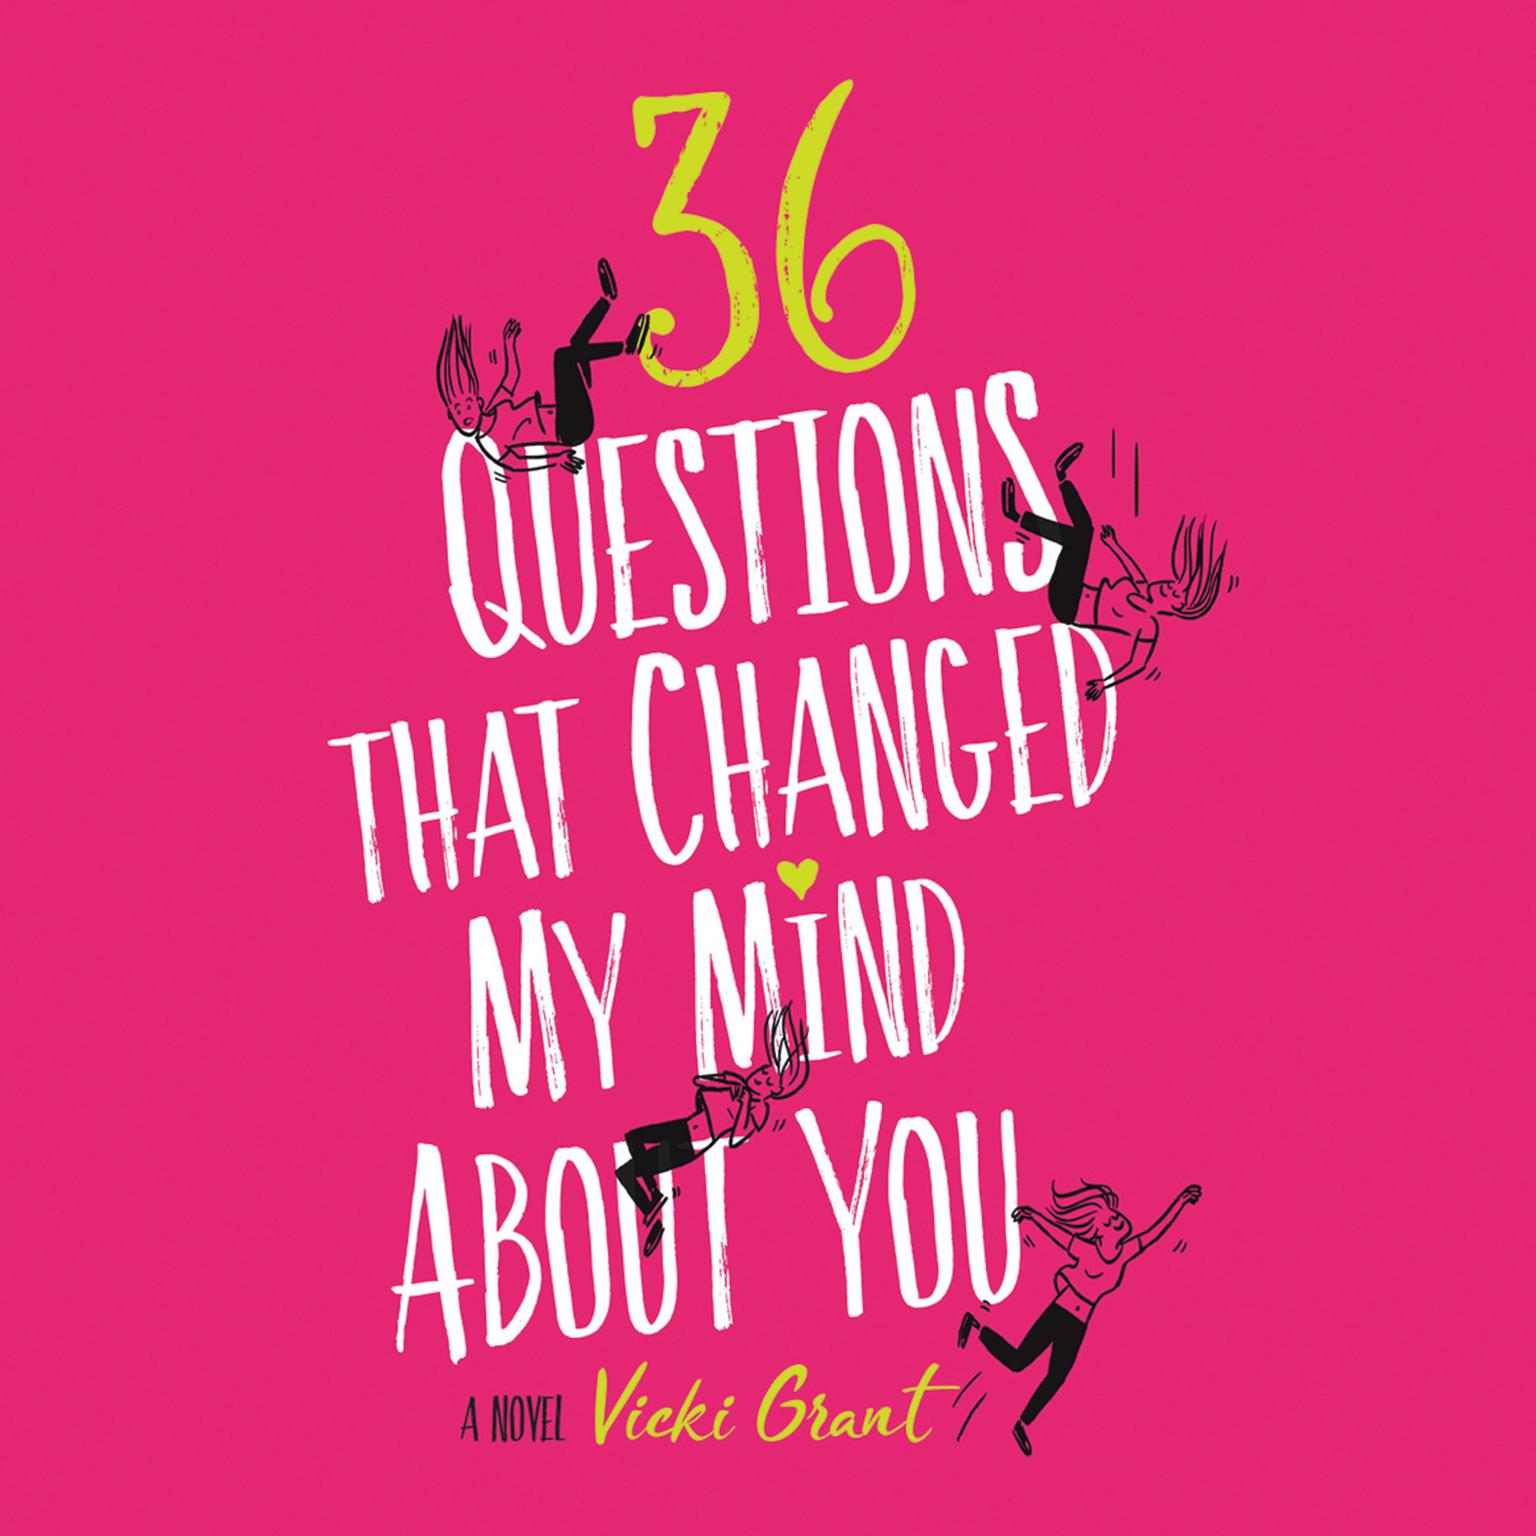 36 Questions That Changed My Mind About You Audiobook, by Vicki Grant